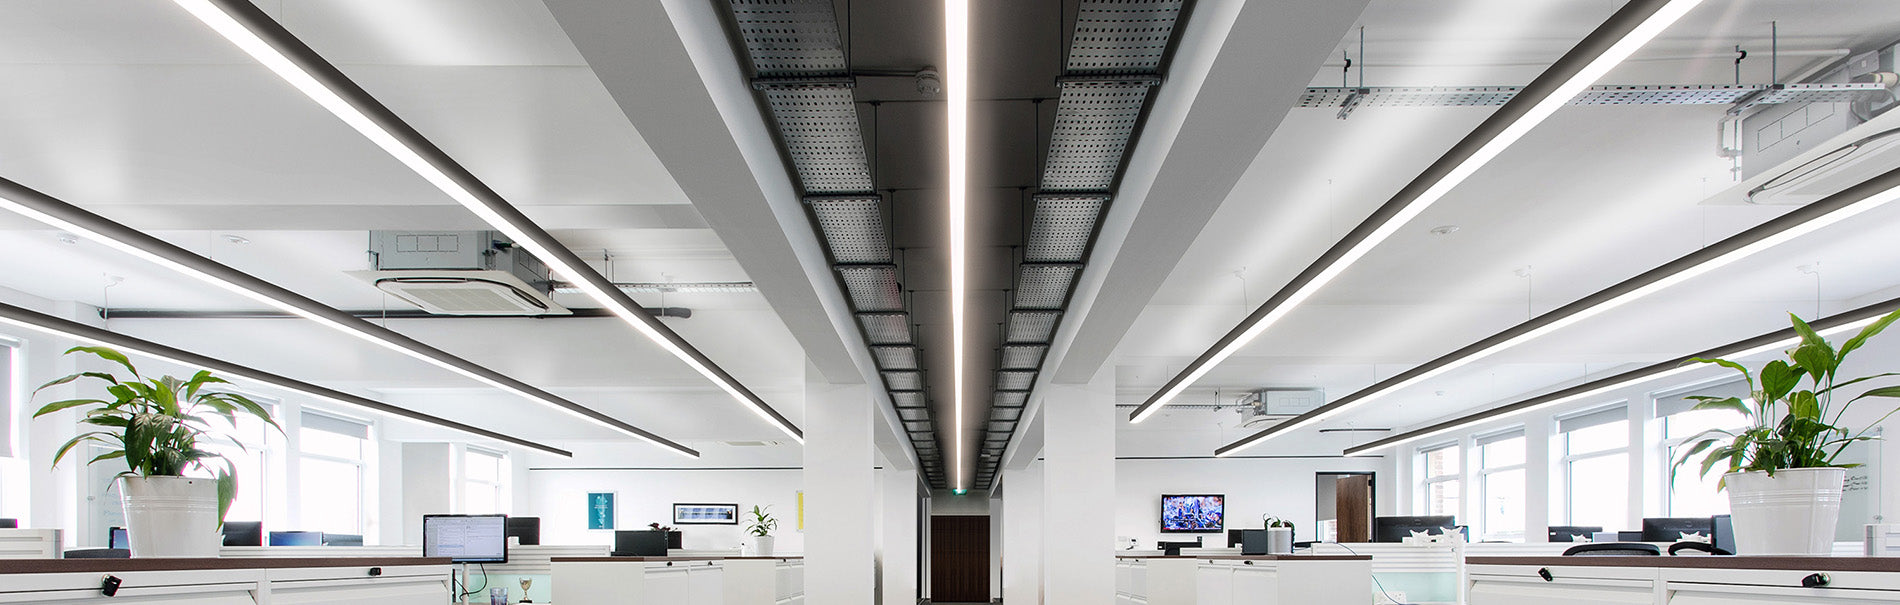 Spacious and brightly lit modern office interior with linear LED lights embedded in the ceiling, reflecting on the glossy white desks below. The room is lined with large windows, and green potted plants add a touch of nature to the workplace. The office design combines a minimalist aesthetic with a functional layout, featuring ergonomic chairs and organized workstations.